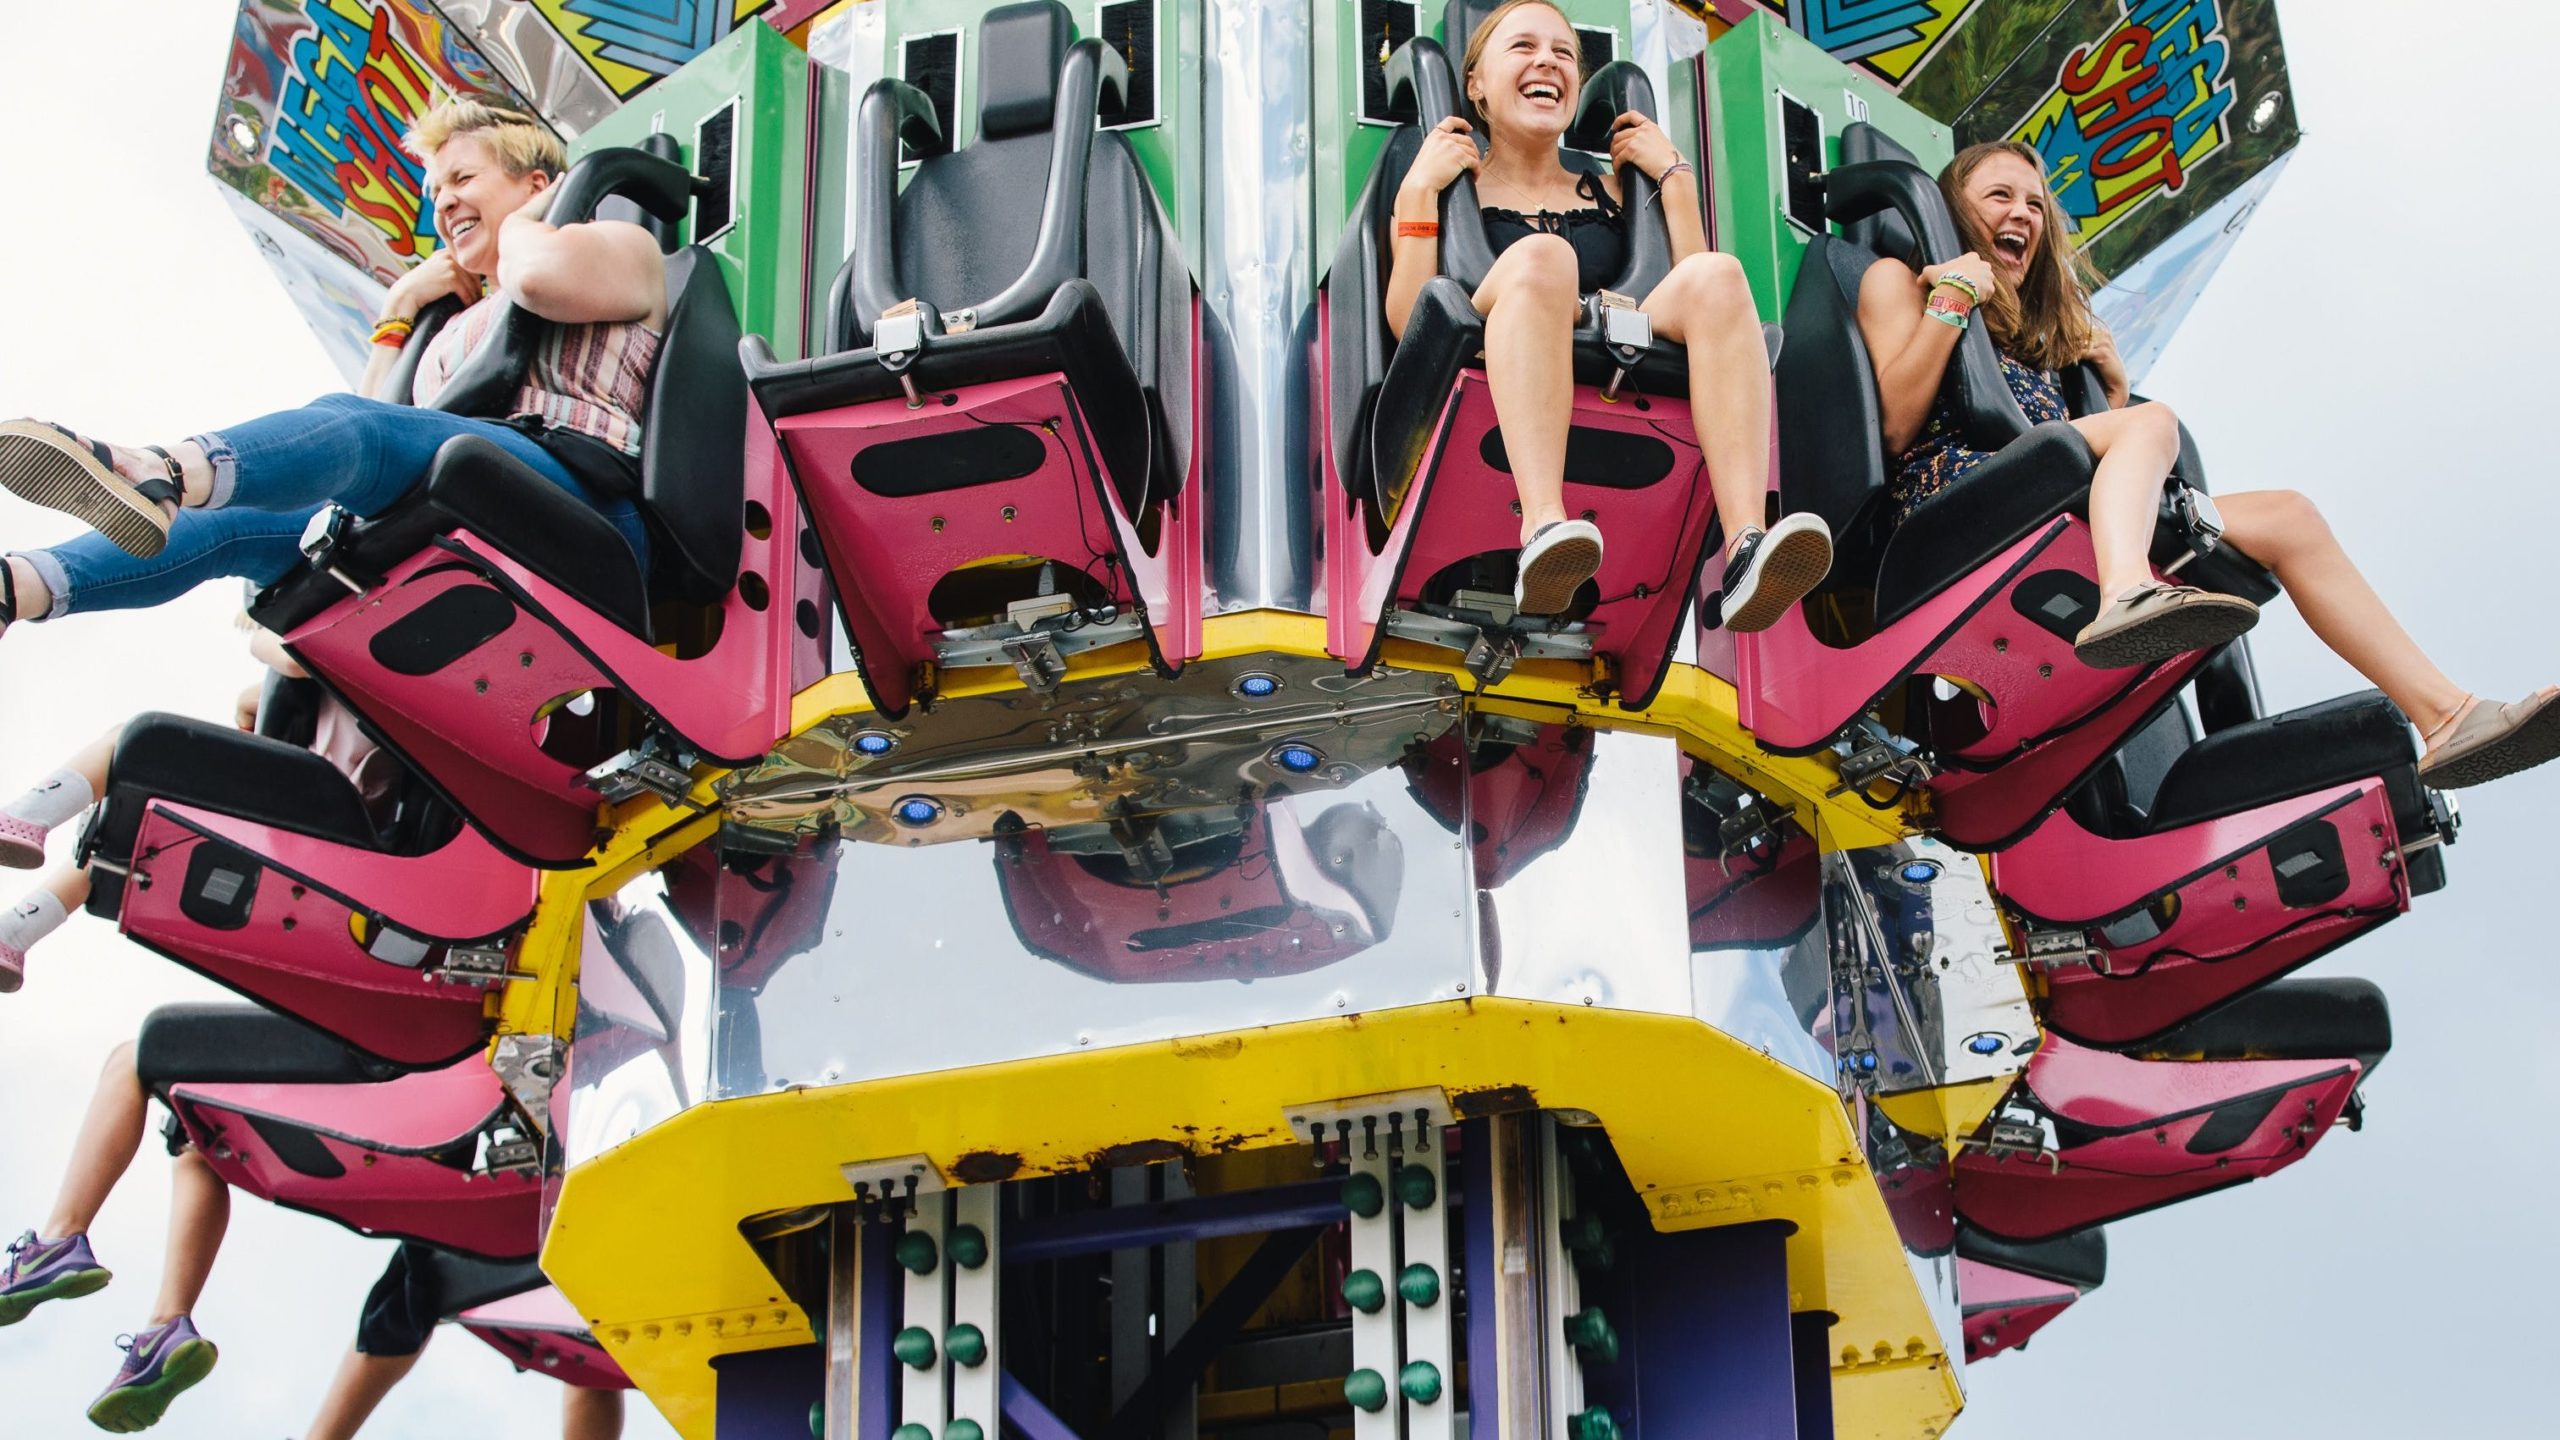 Rock ‘n’ Rides hits Royal Oak with carnival, local music as fests kick back into action